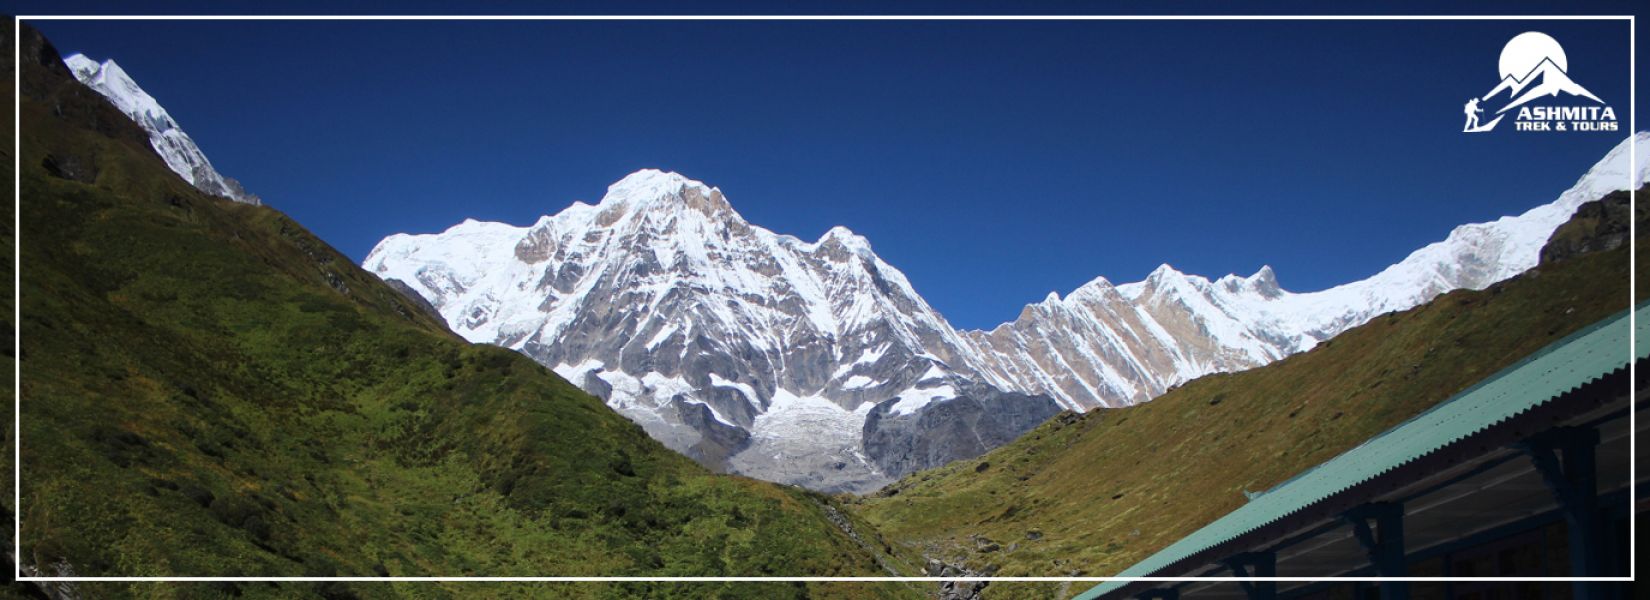 The Annapurna region is certainly one of the famous destinations in the Trekkers